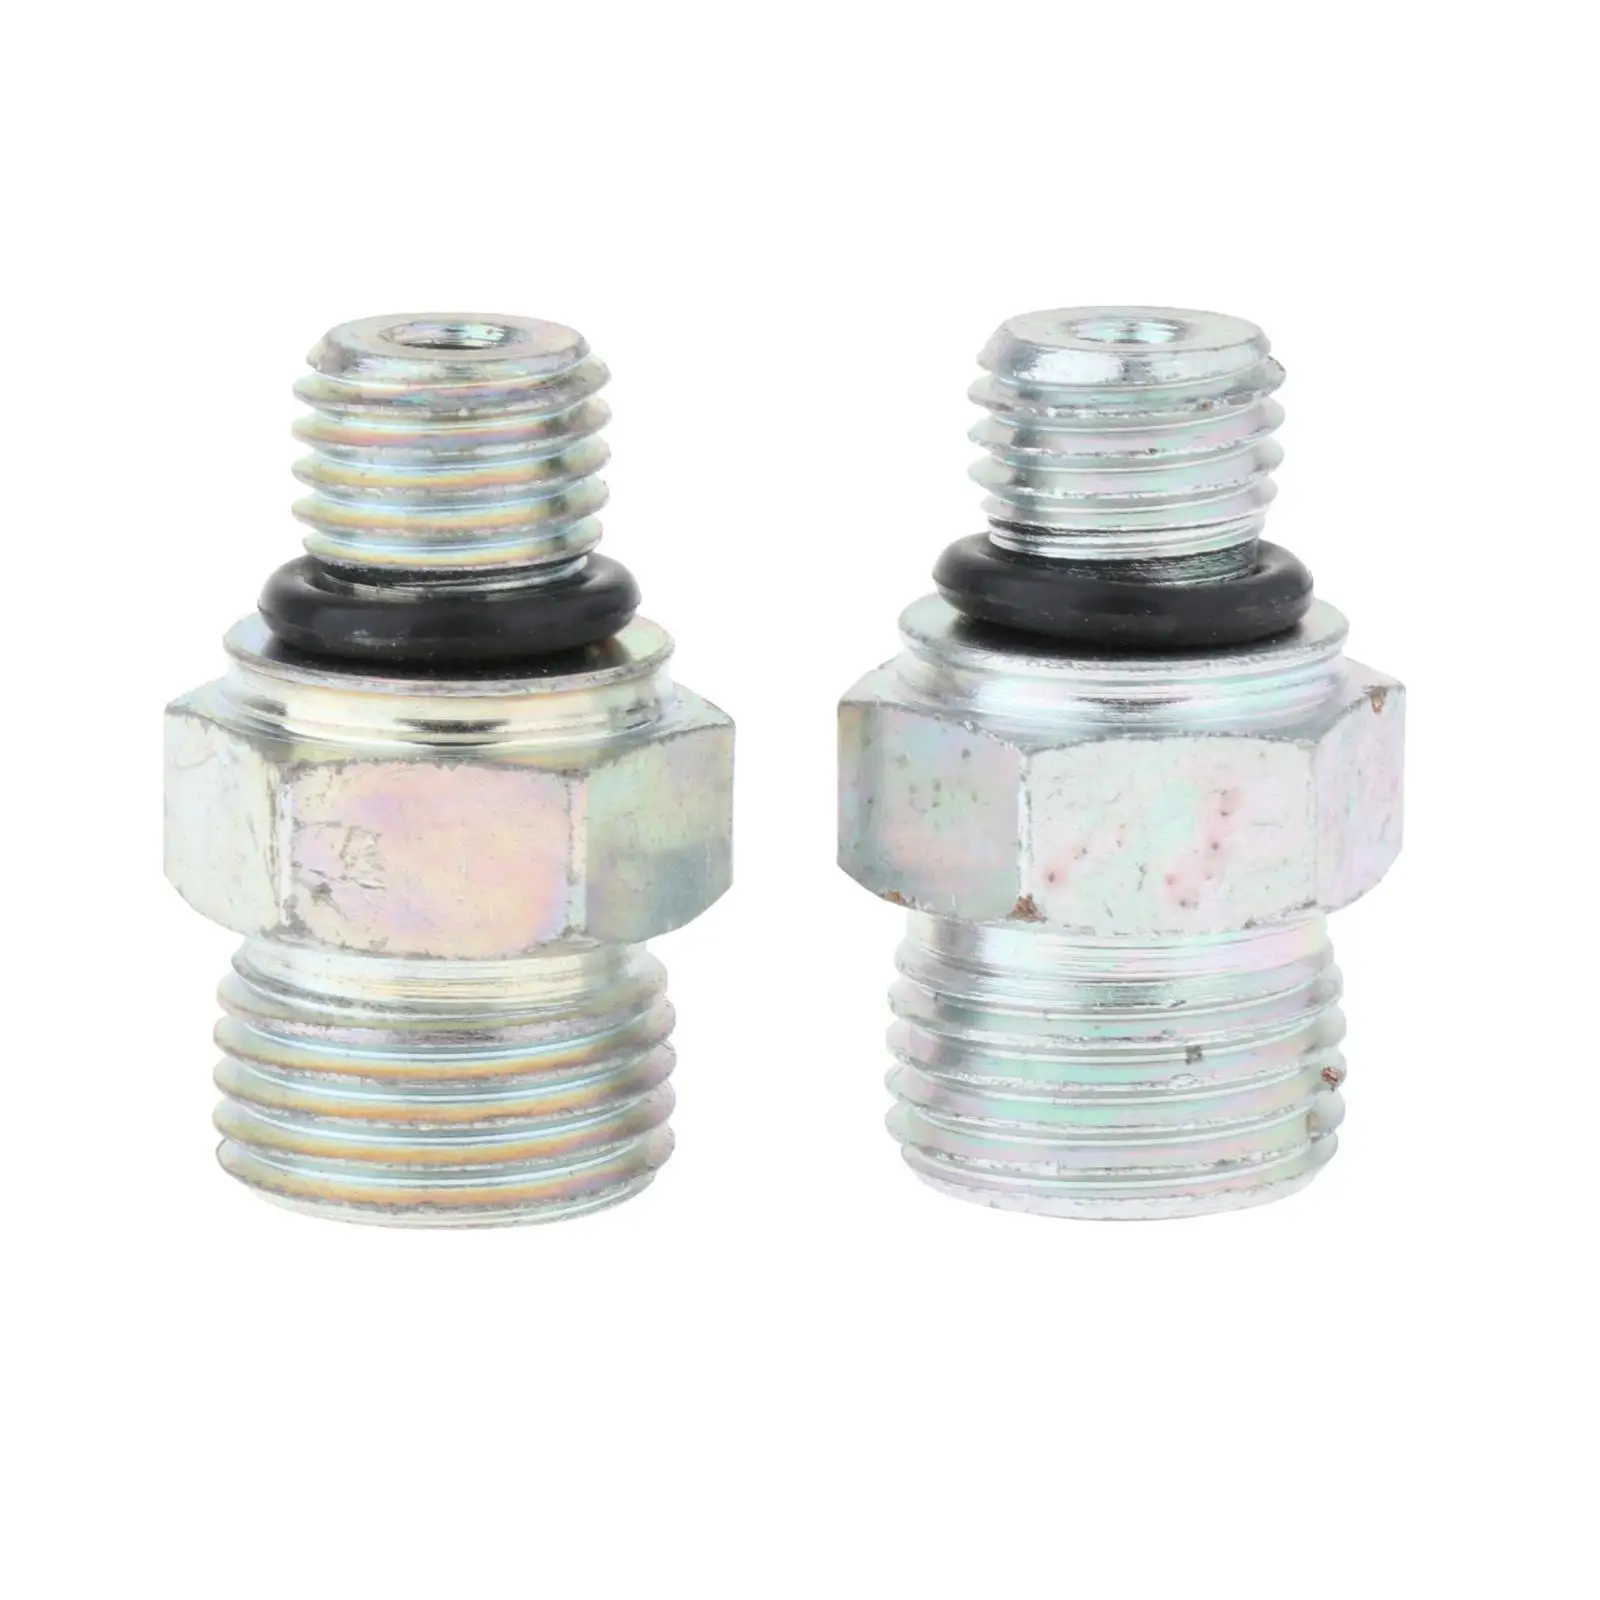 2Pcs Turbo Oil feed Line Fitting for Vehicle Automotive Engine Parts